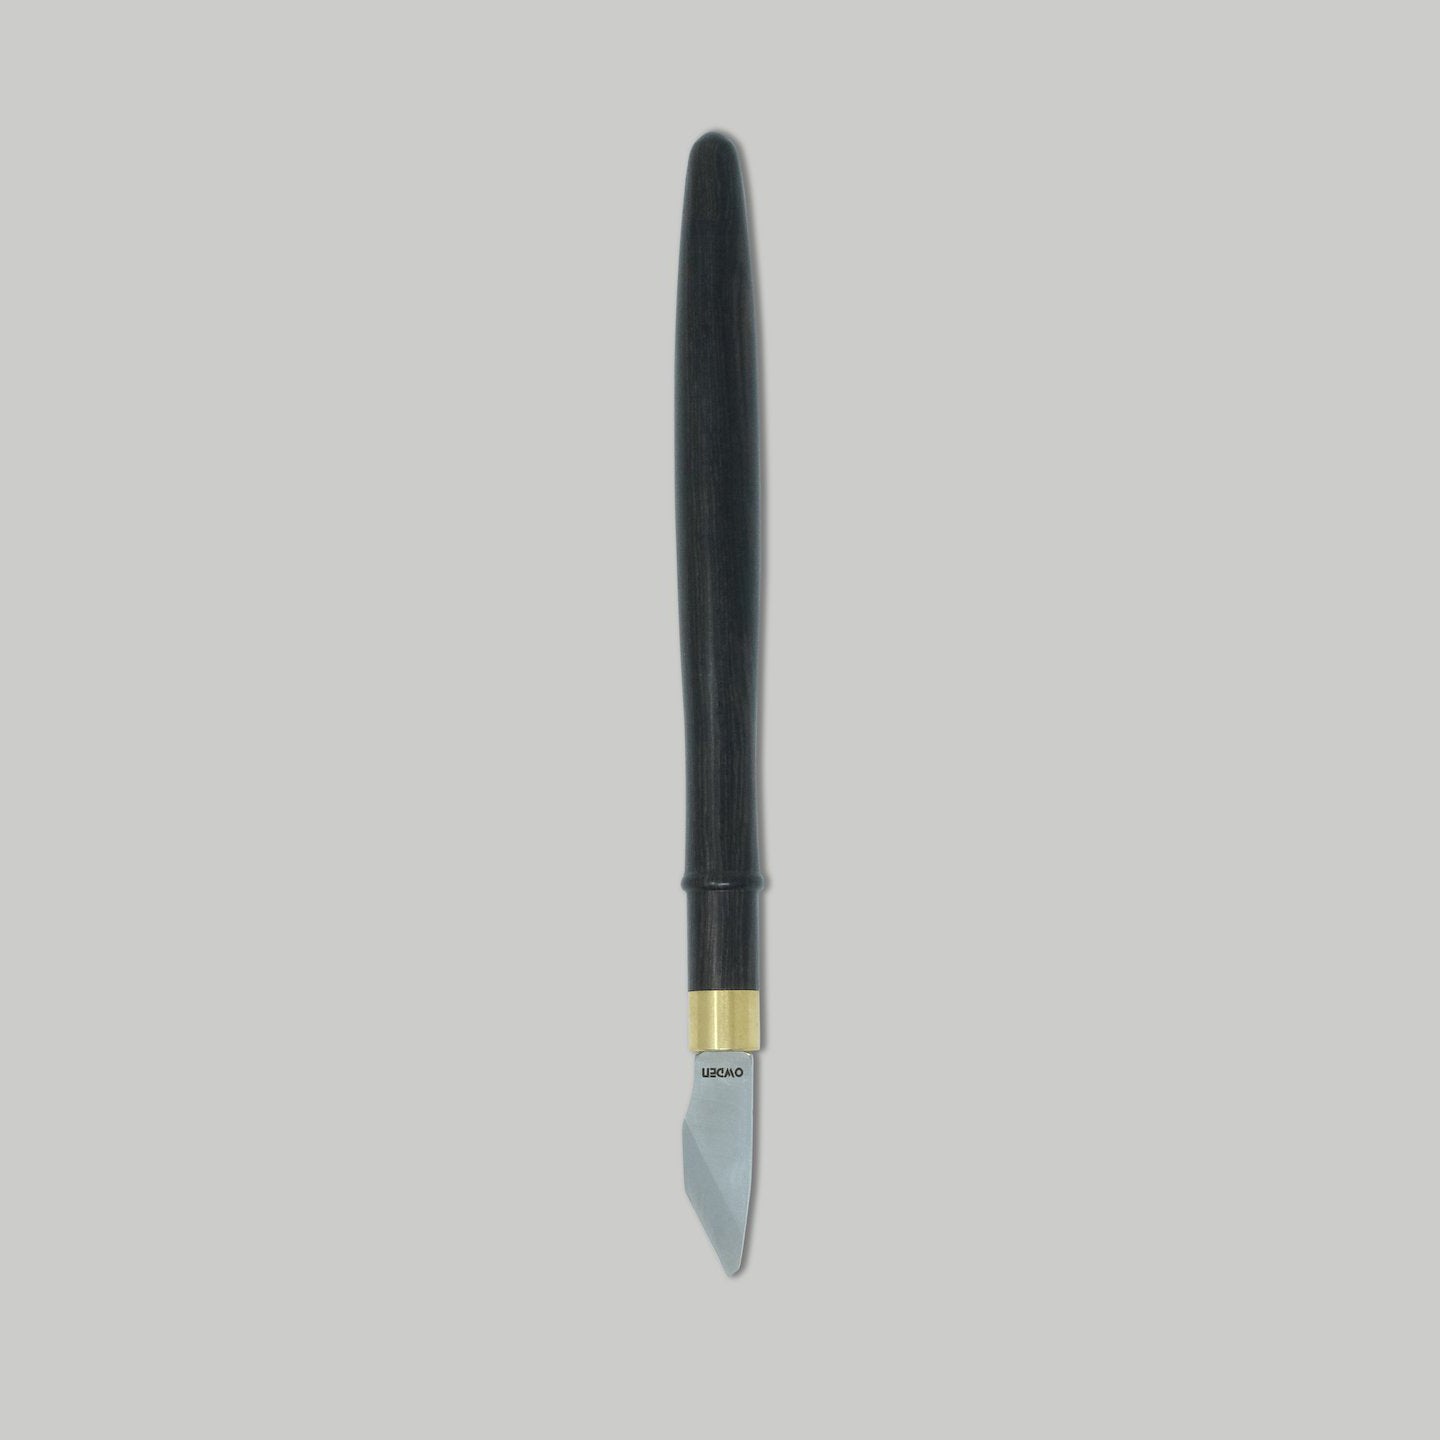 OWDEN Carving knife